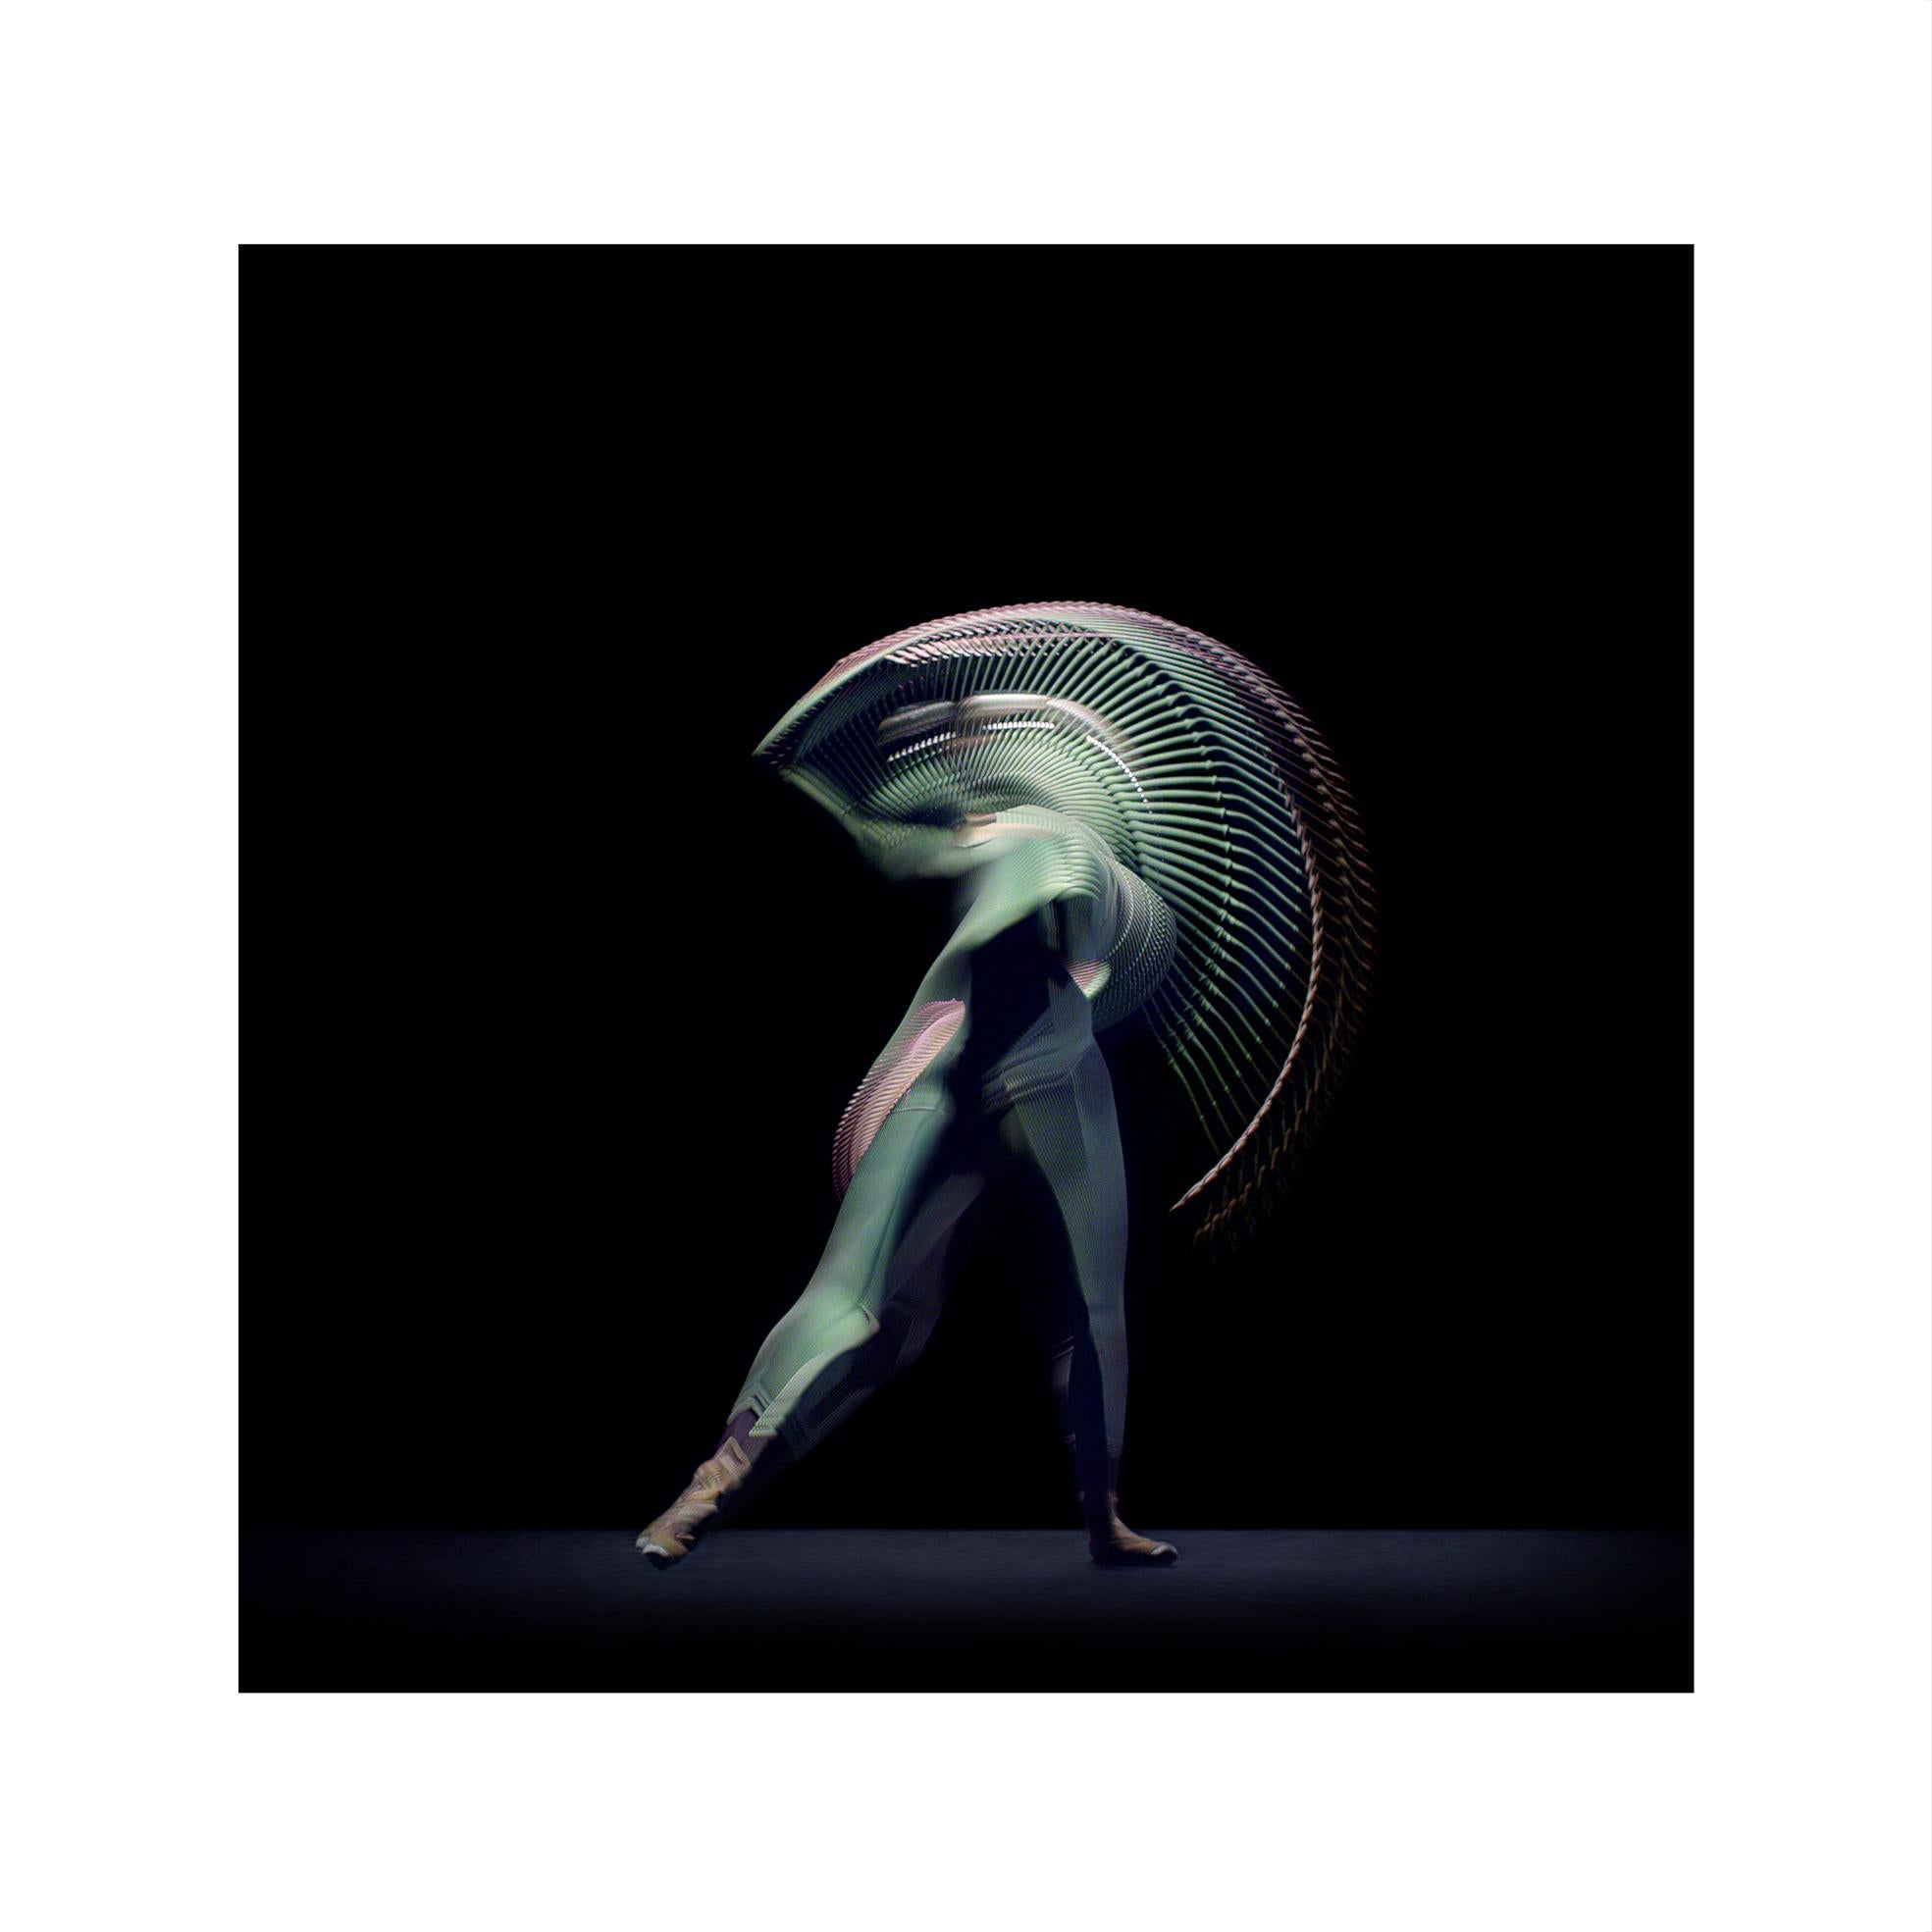 Abstract Dancers, Green 5, 2019 by Giles Revell - Photography, Print, Ballet